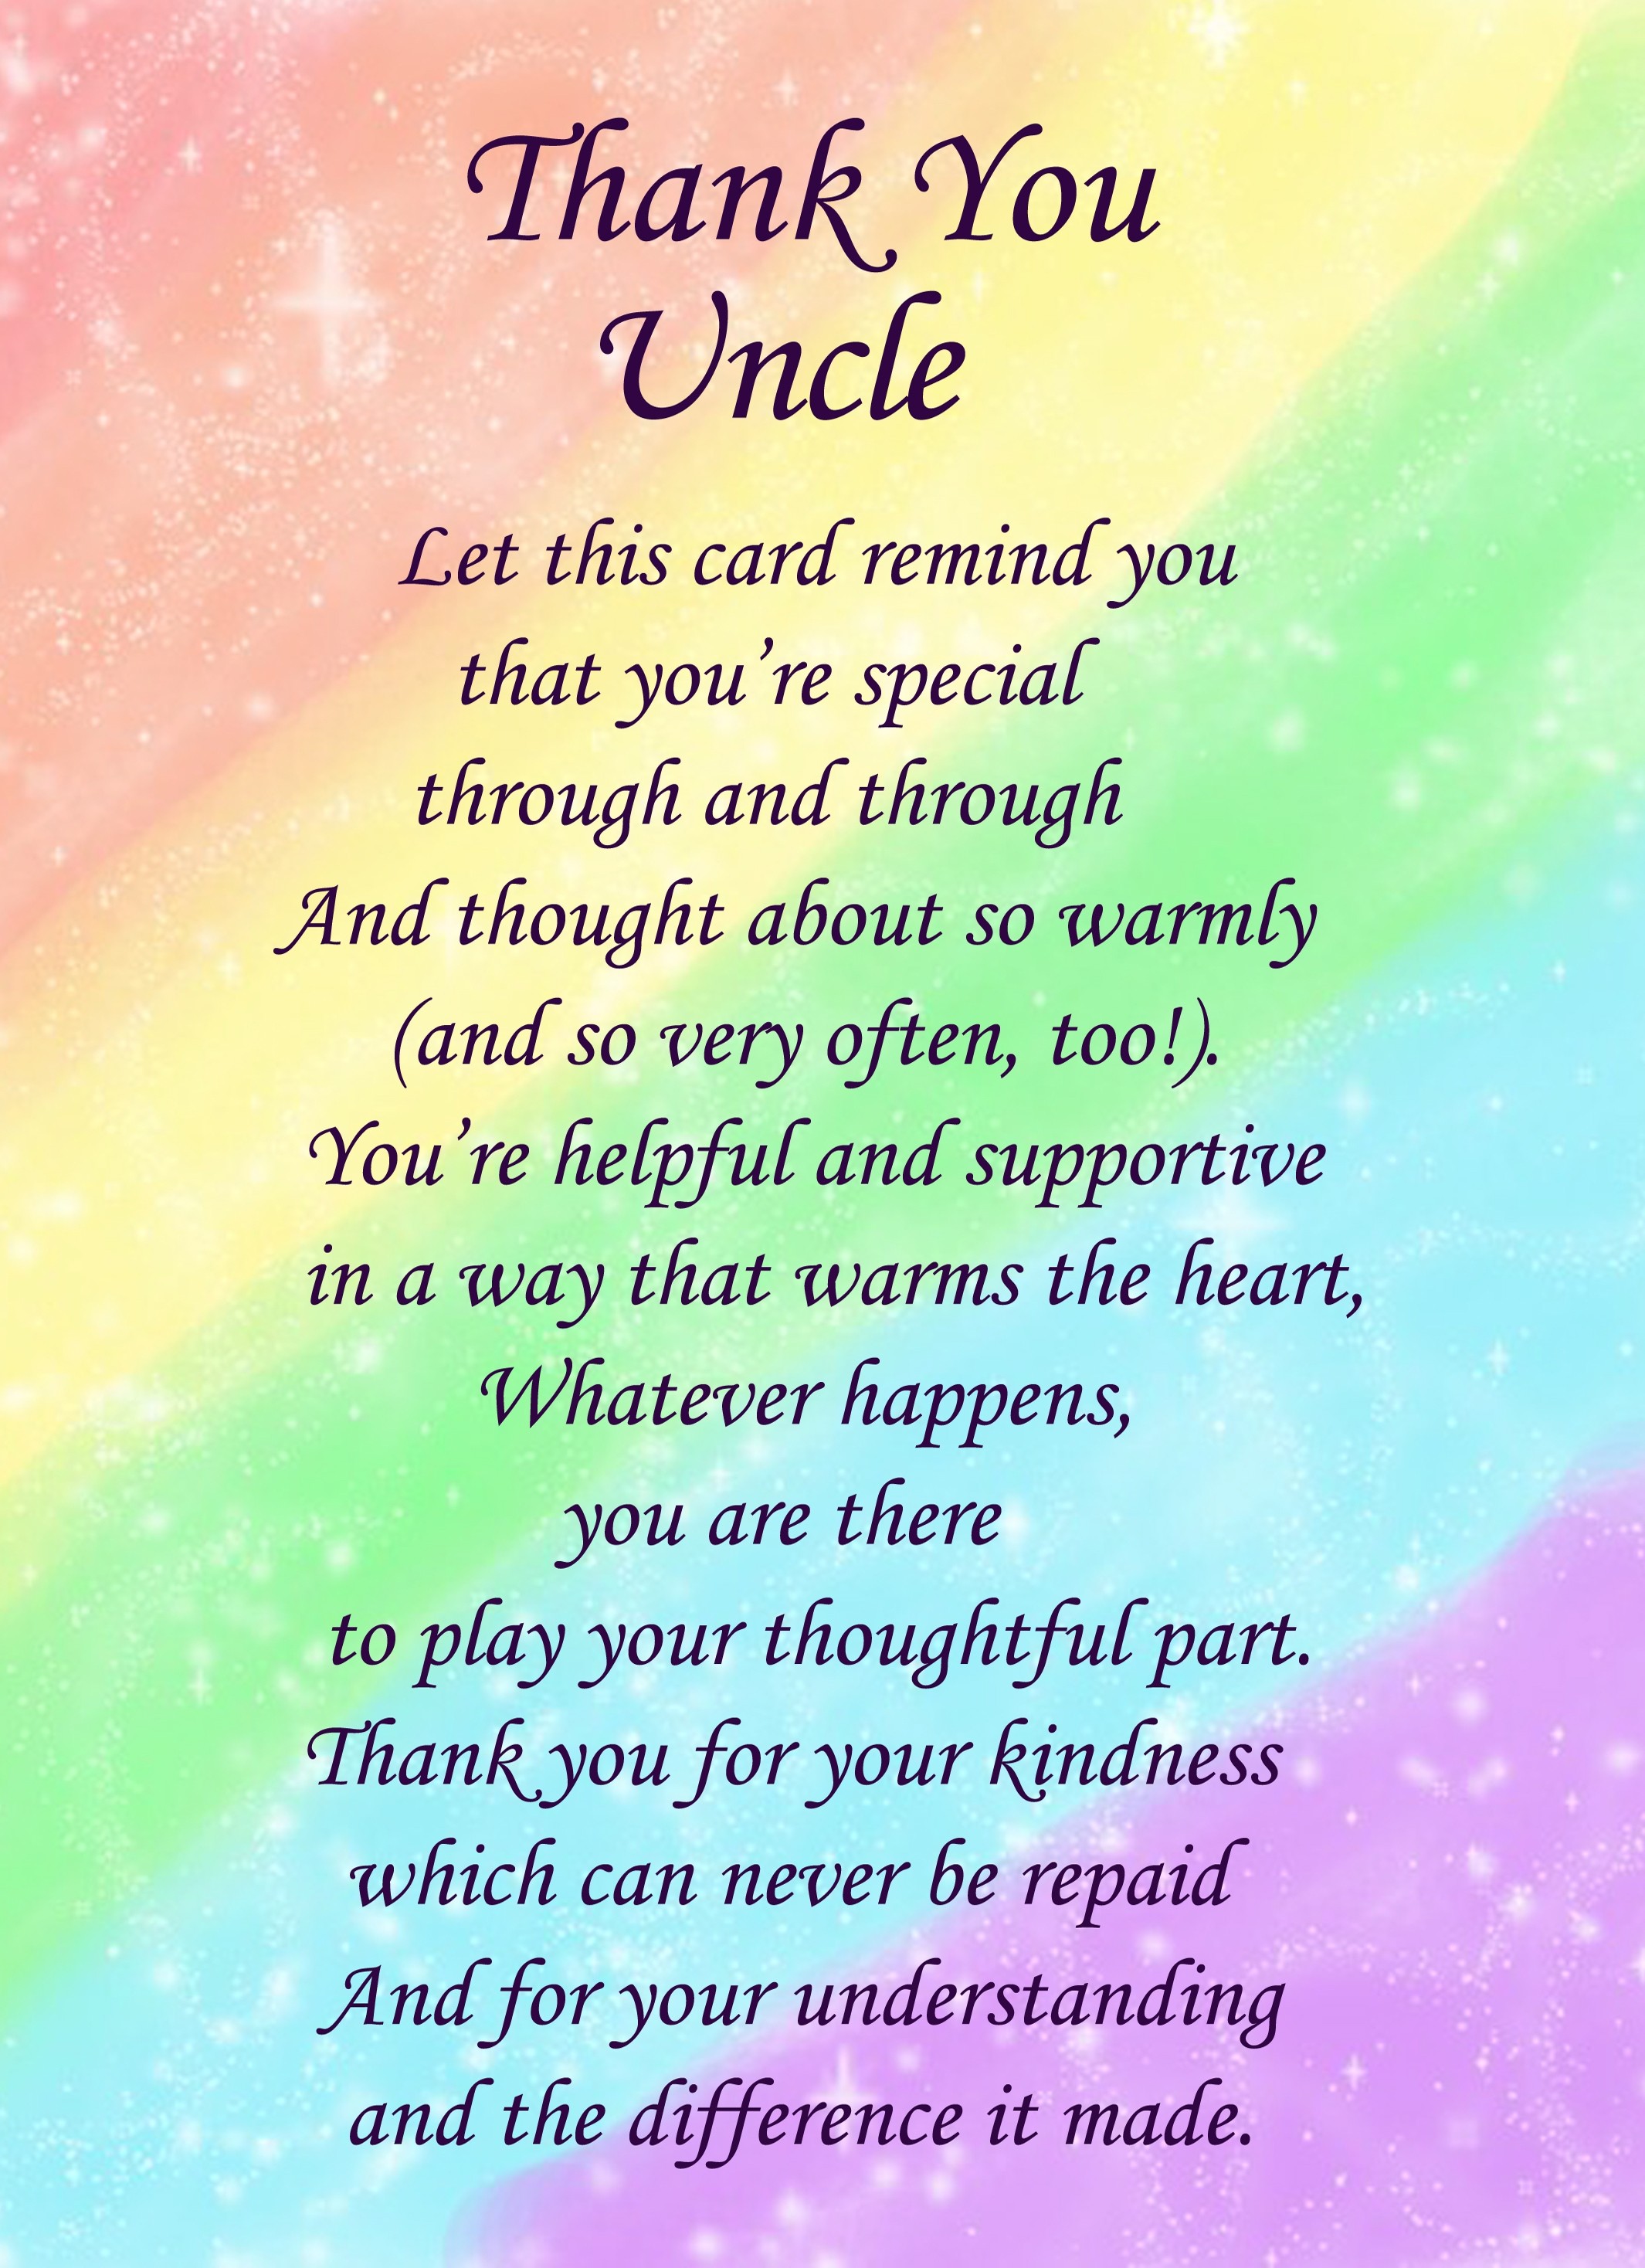 Thank You 'Uncle' Poem Verse Greeting Card